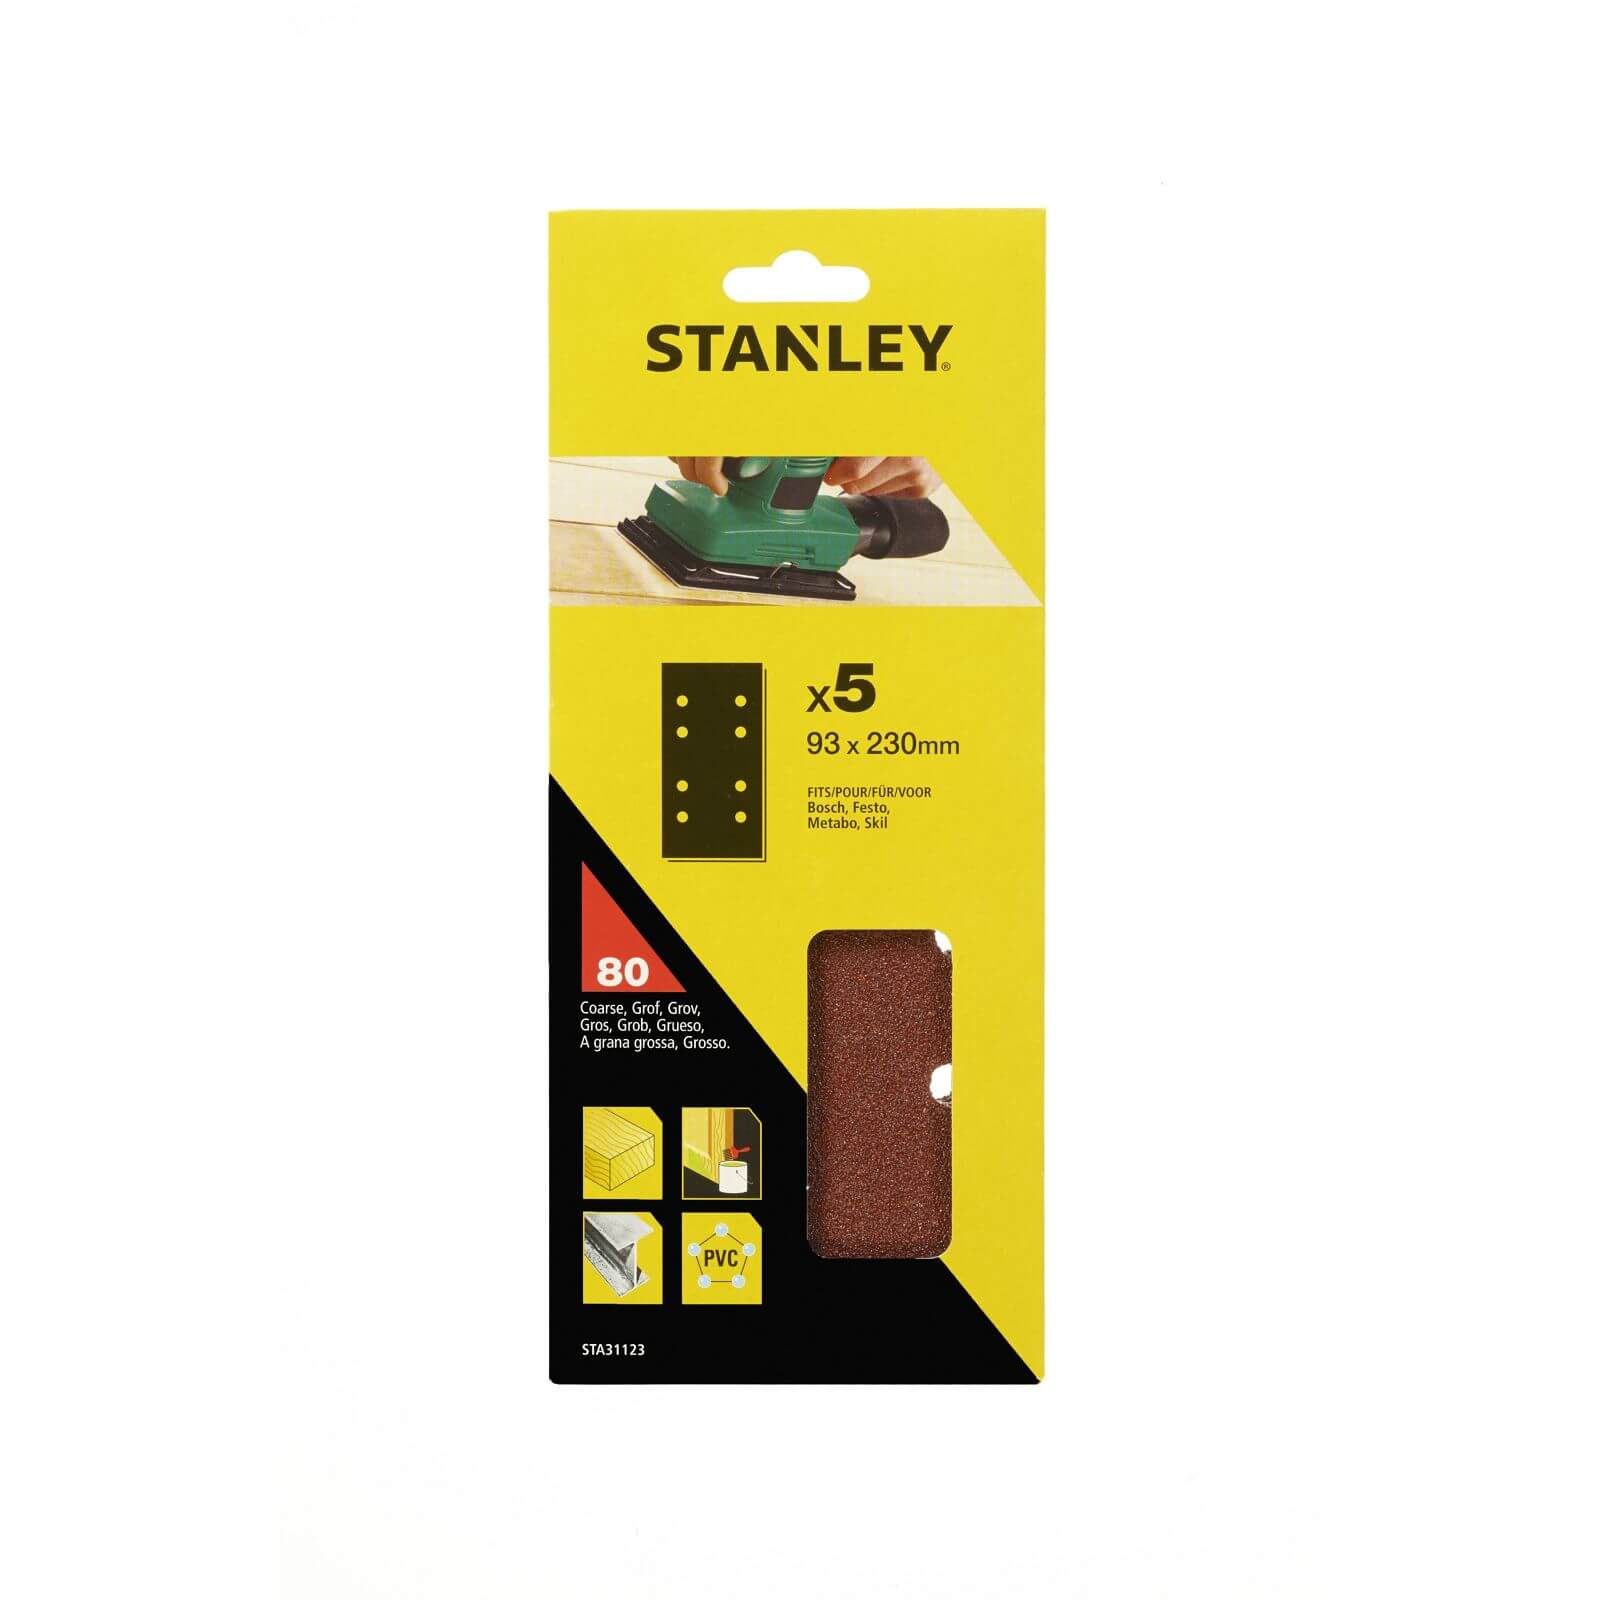 Photo of Stanley 1/3 Sheet Sander Punched Wire Clip 80g Sanding Sheets